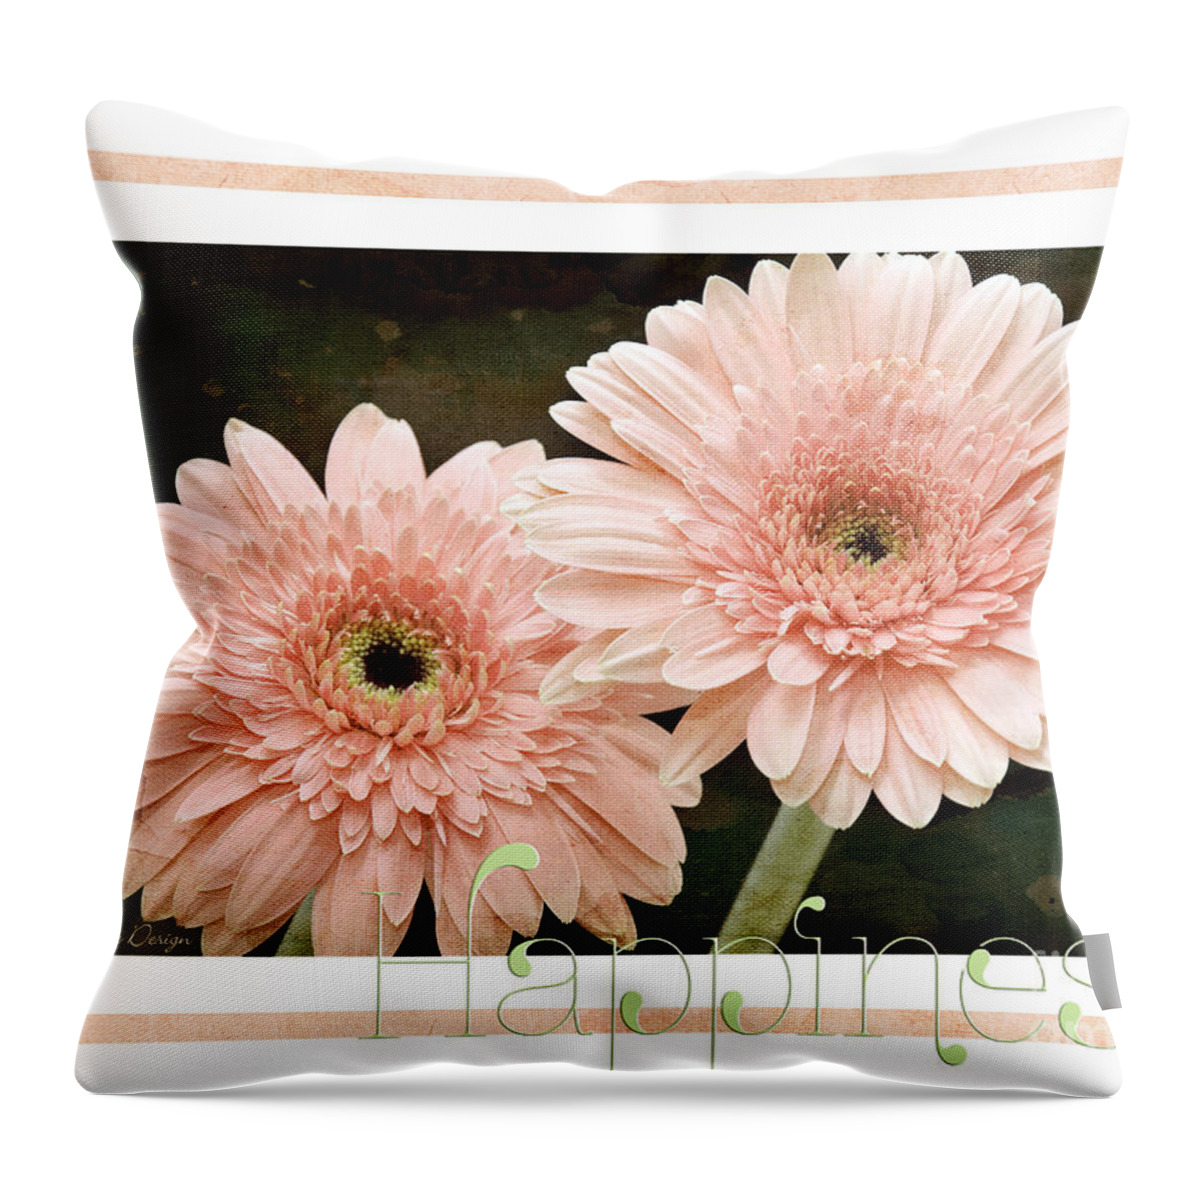 Gerber Throw Pillow featuring the photograph Gerber Daisy Happiness 5 by Andee Design